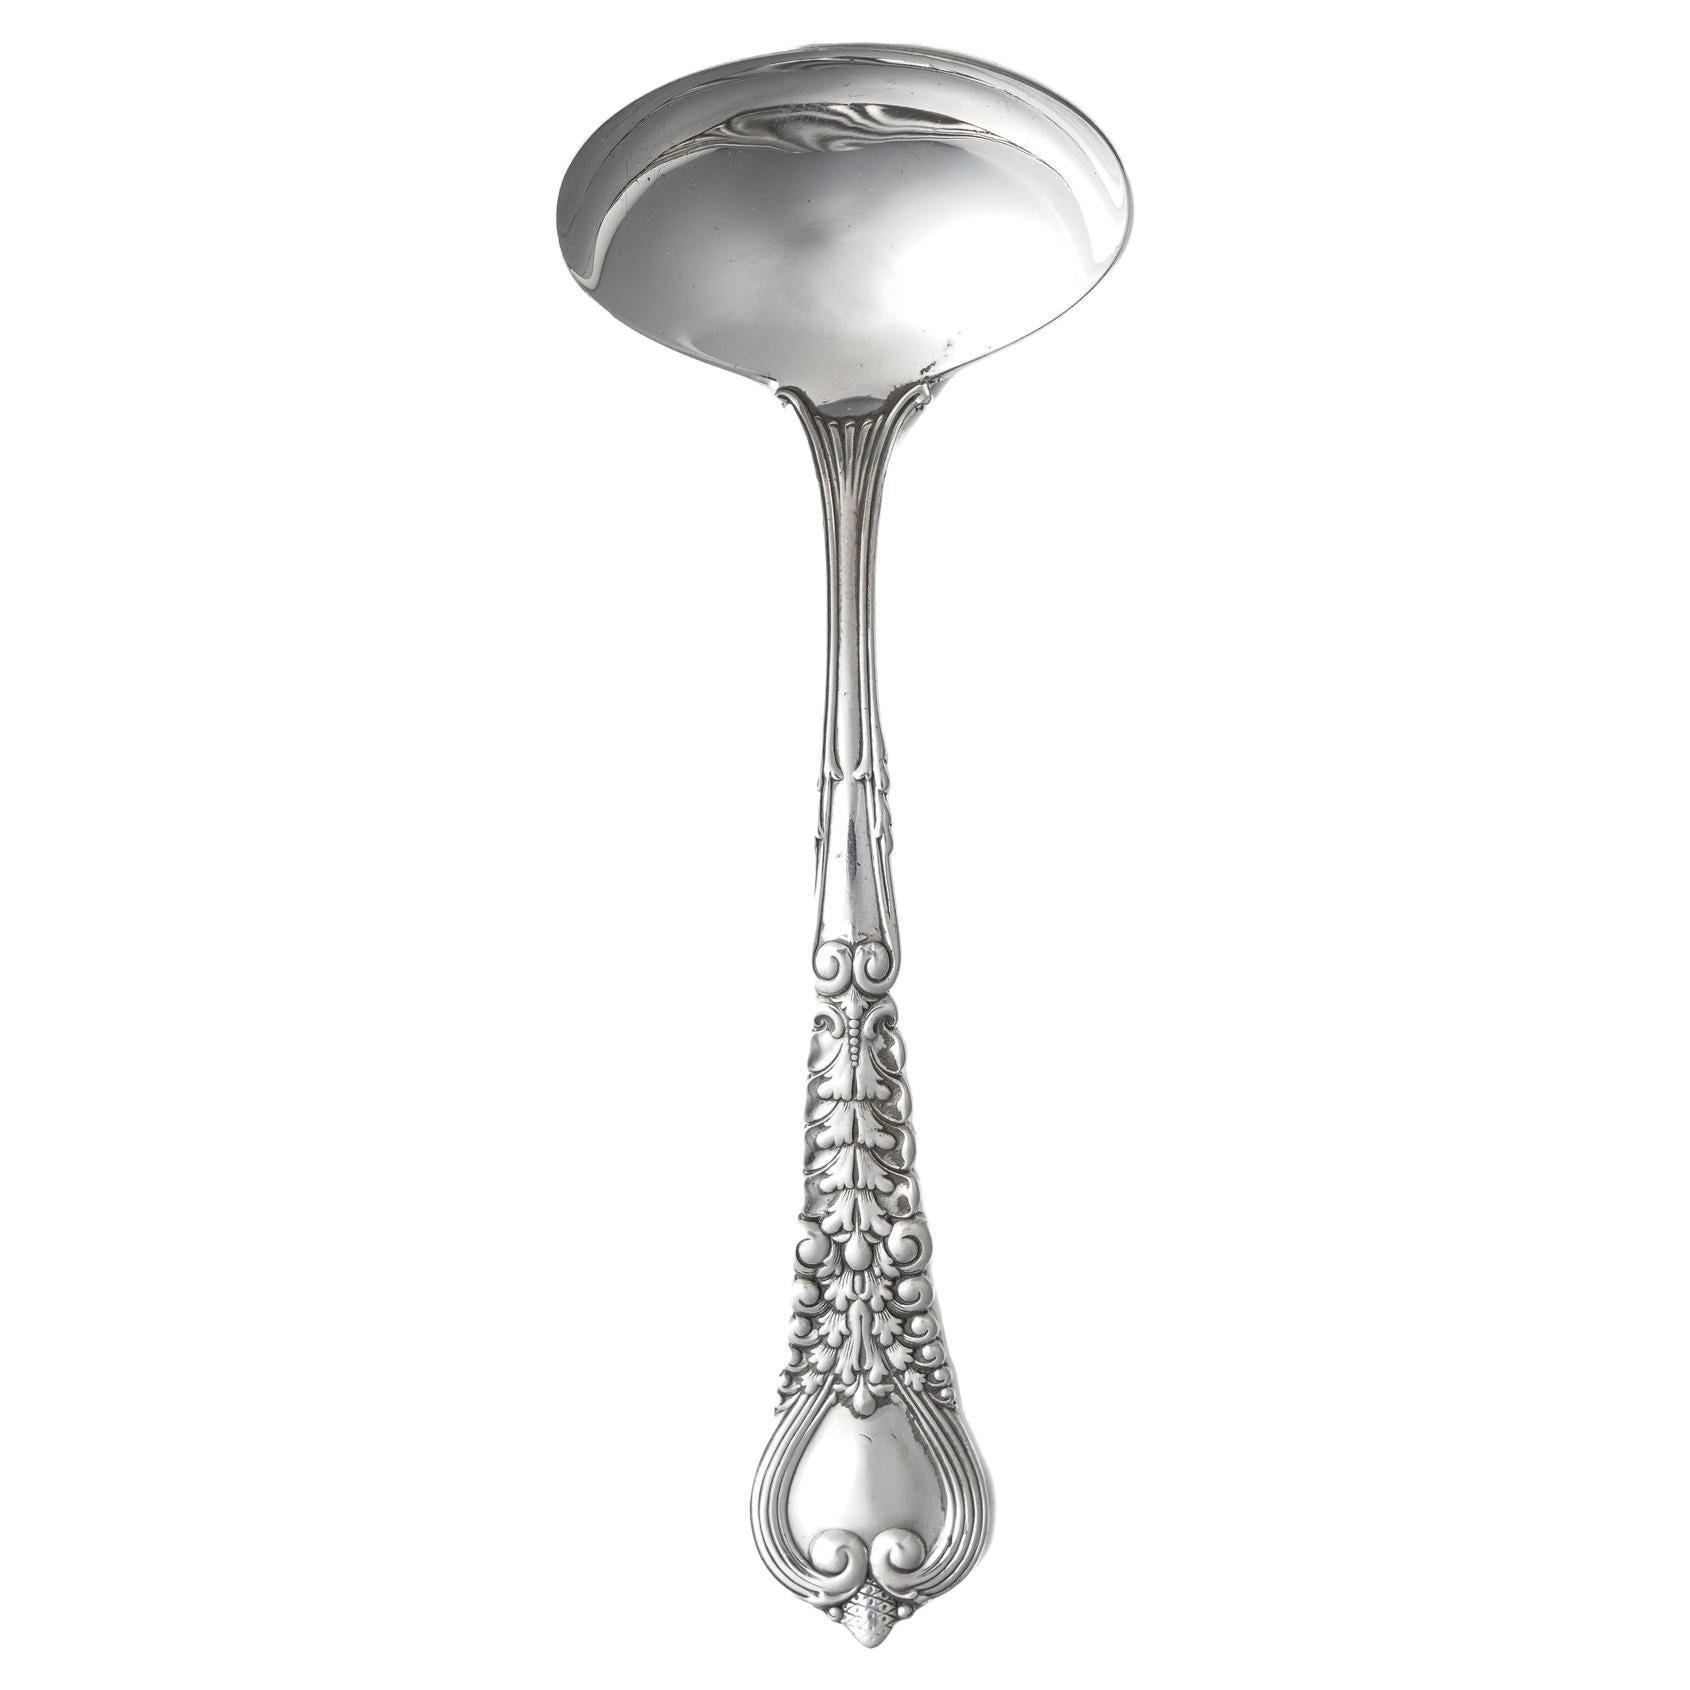 Antique Tiffany & Co. Sterling Silver Florentine Pattern Sauce Ladle For Sale